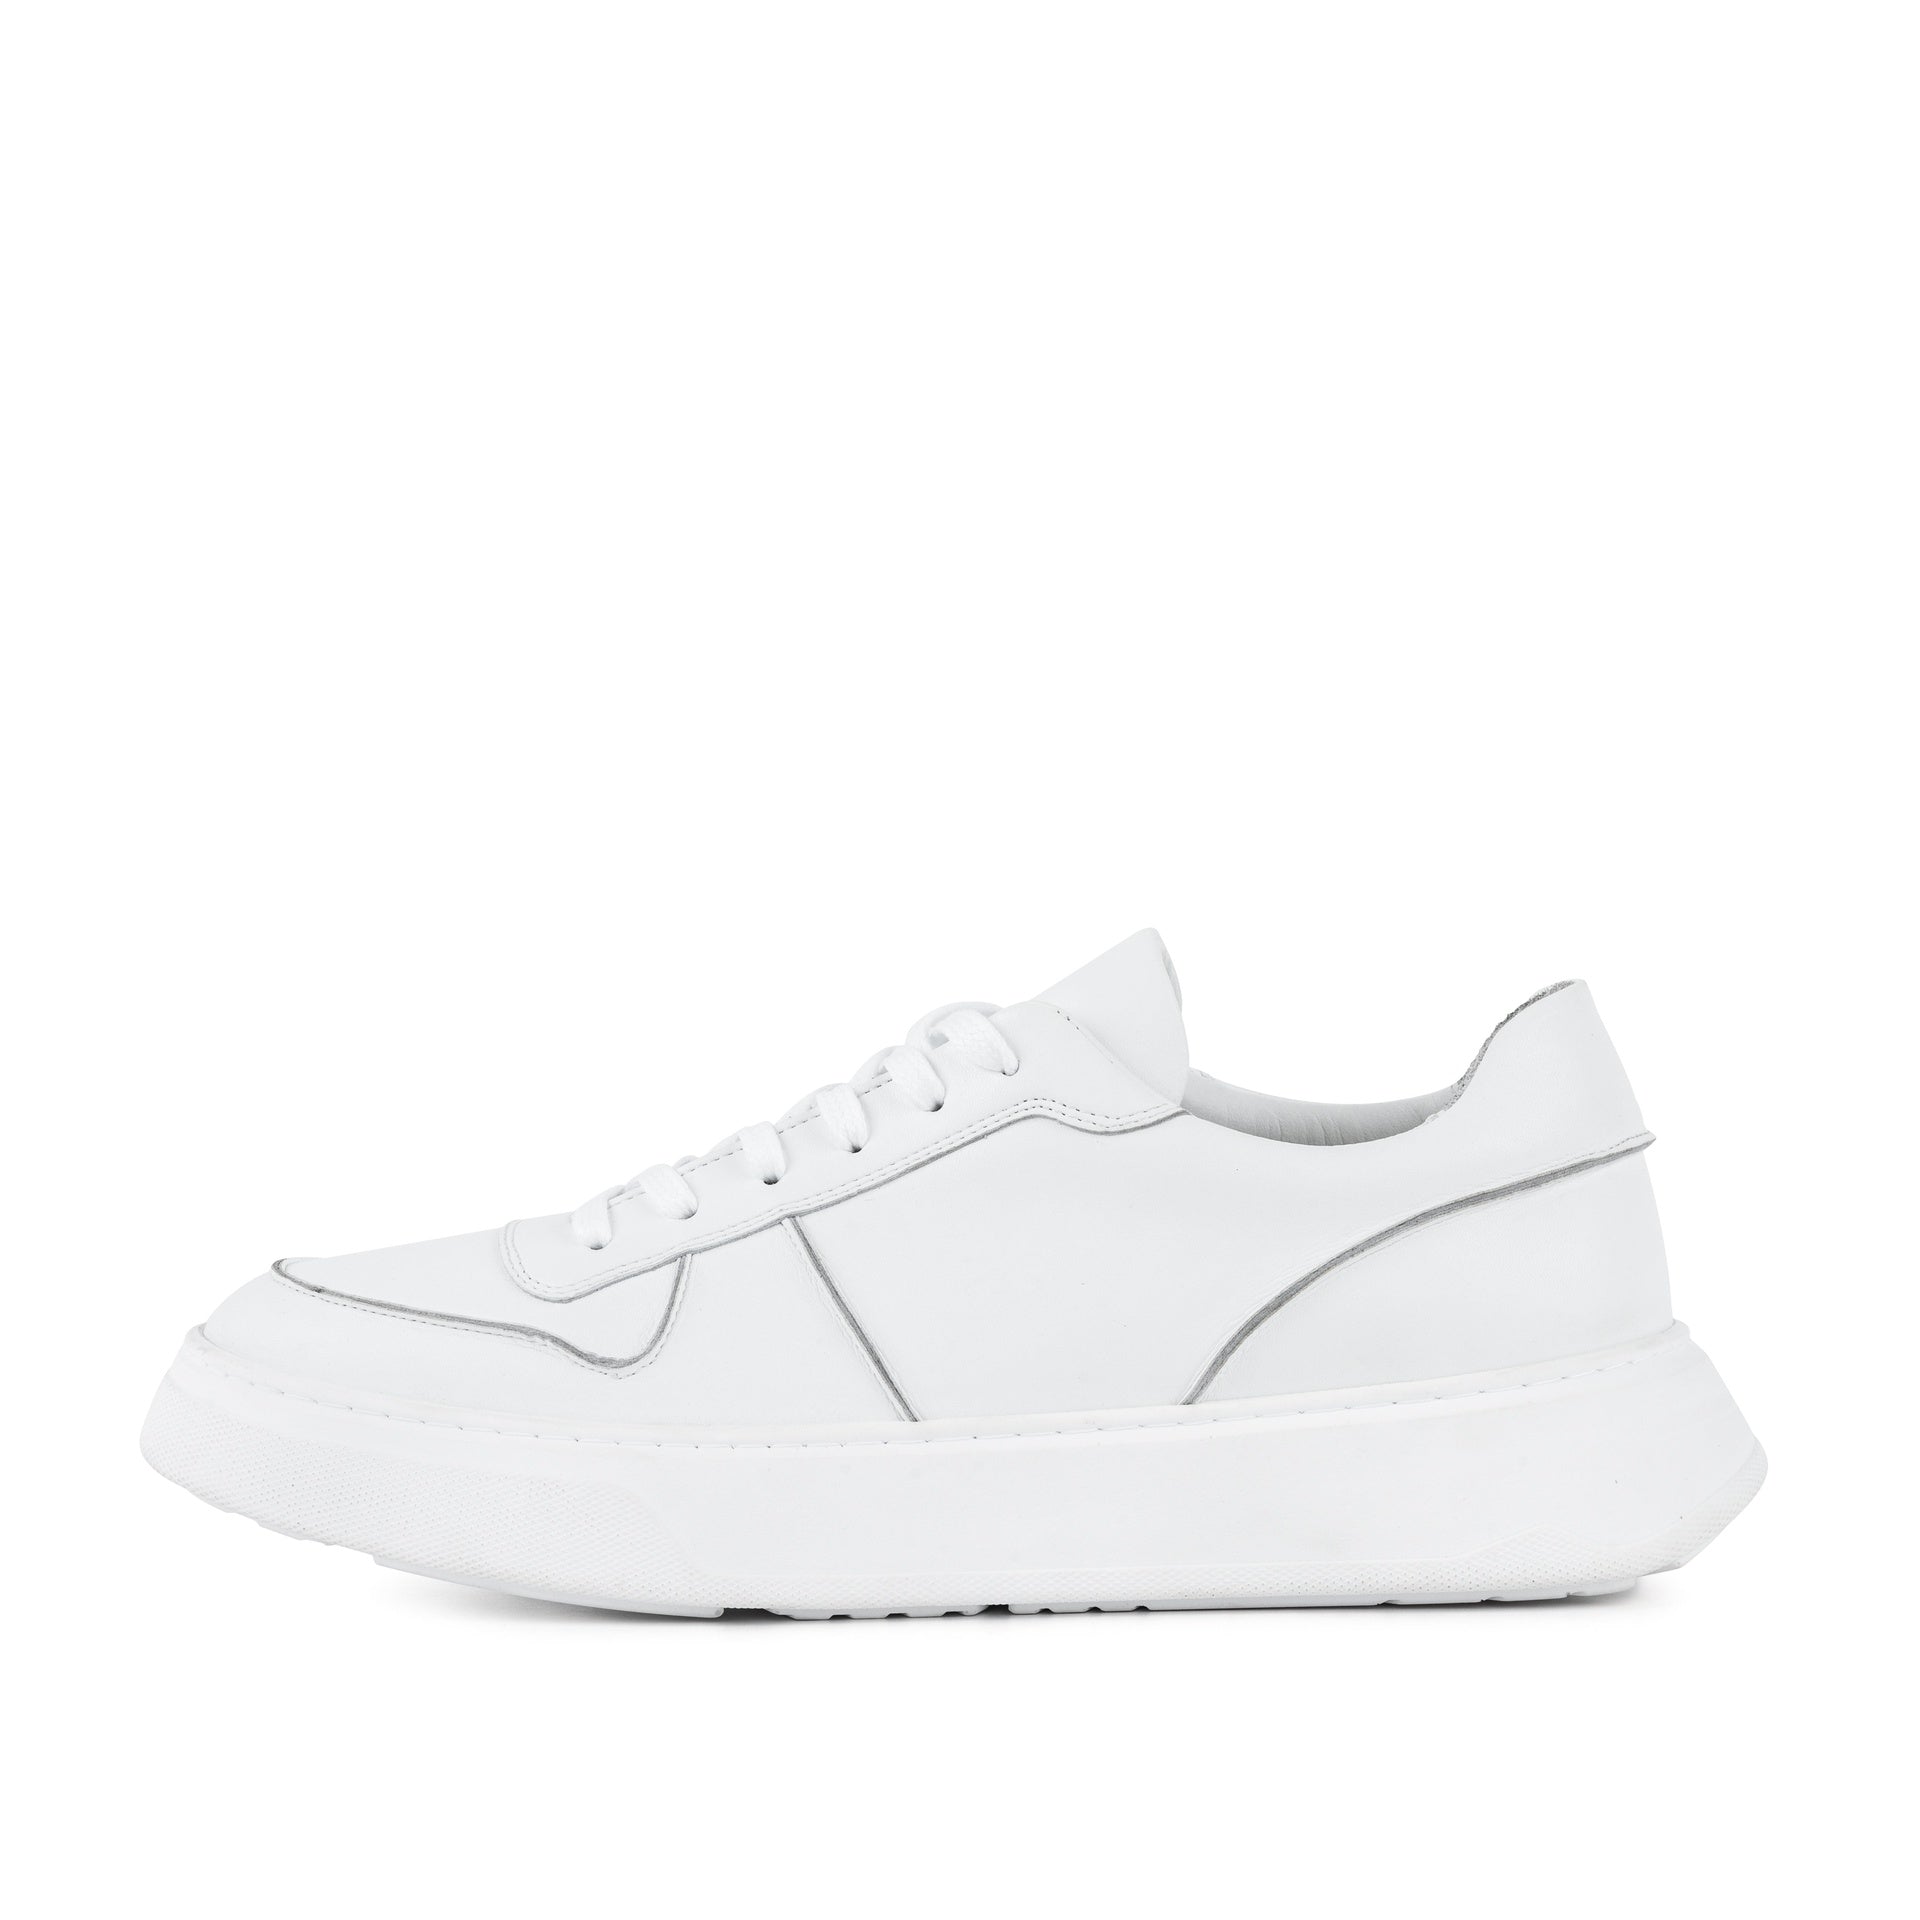 MENS GS28 SPHERE WHITE TRAINER - Just in from Portugal